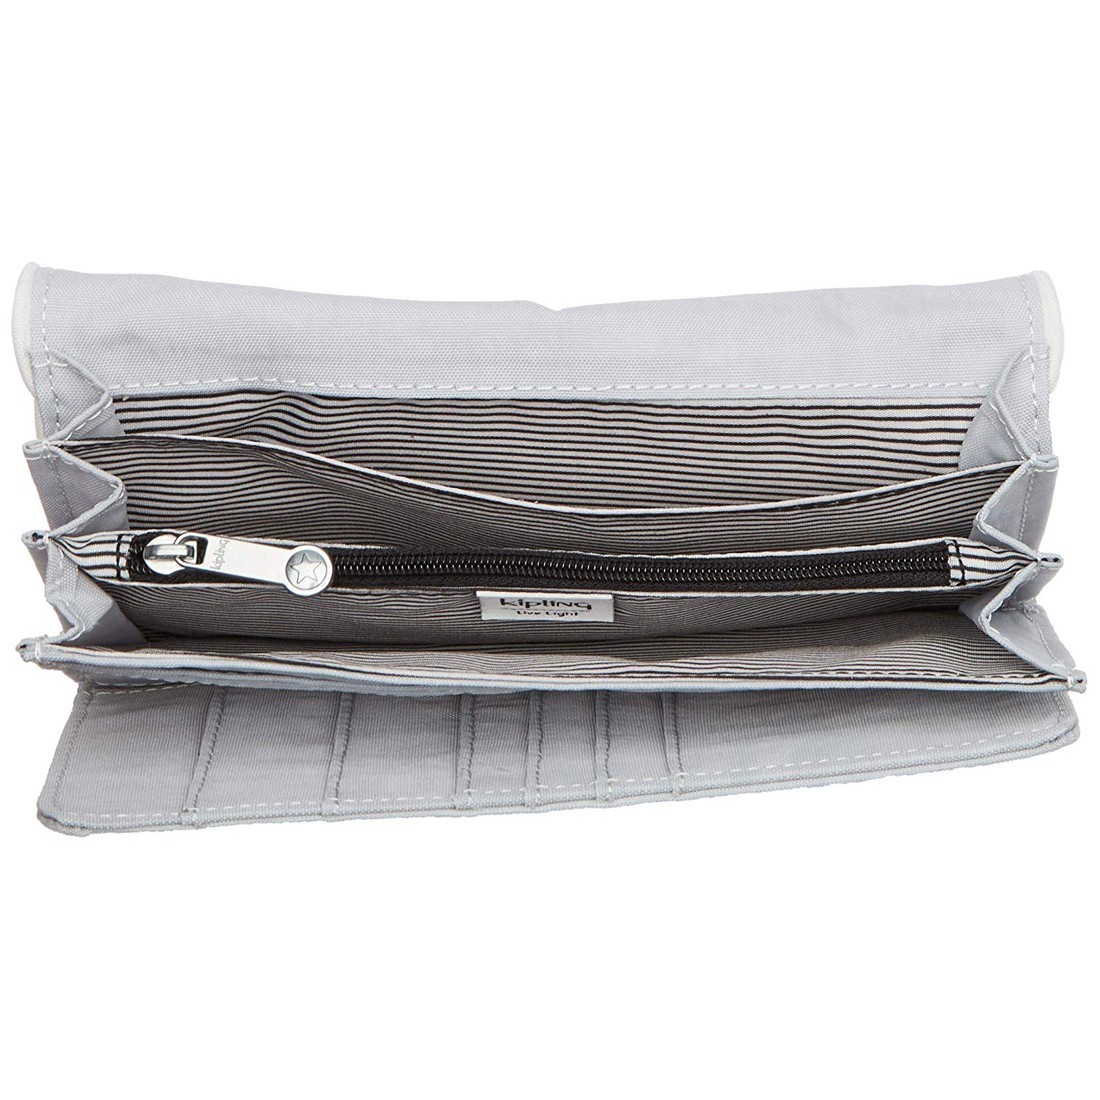 Buy Kipling SUPERMONEY Wallet - Active Grey Bl - Kipling, delivered to your  home | The Outfit